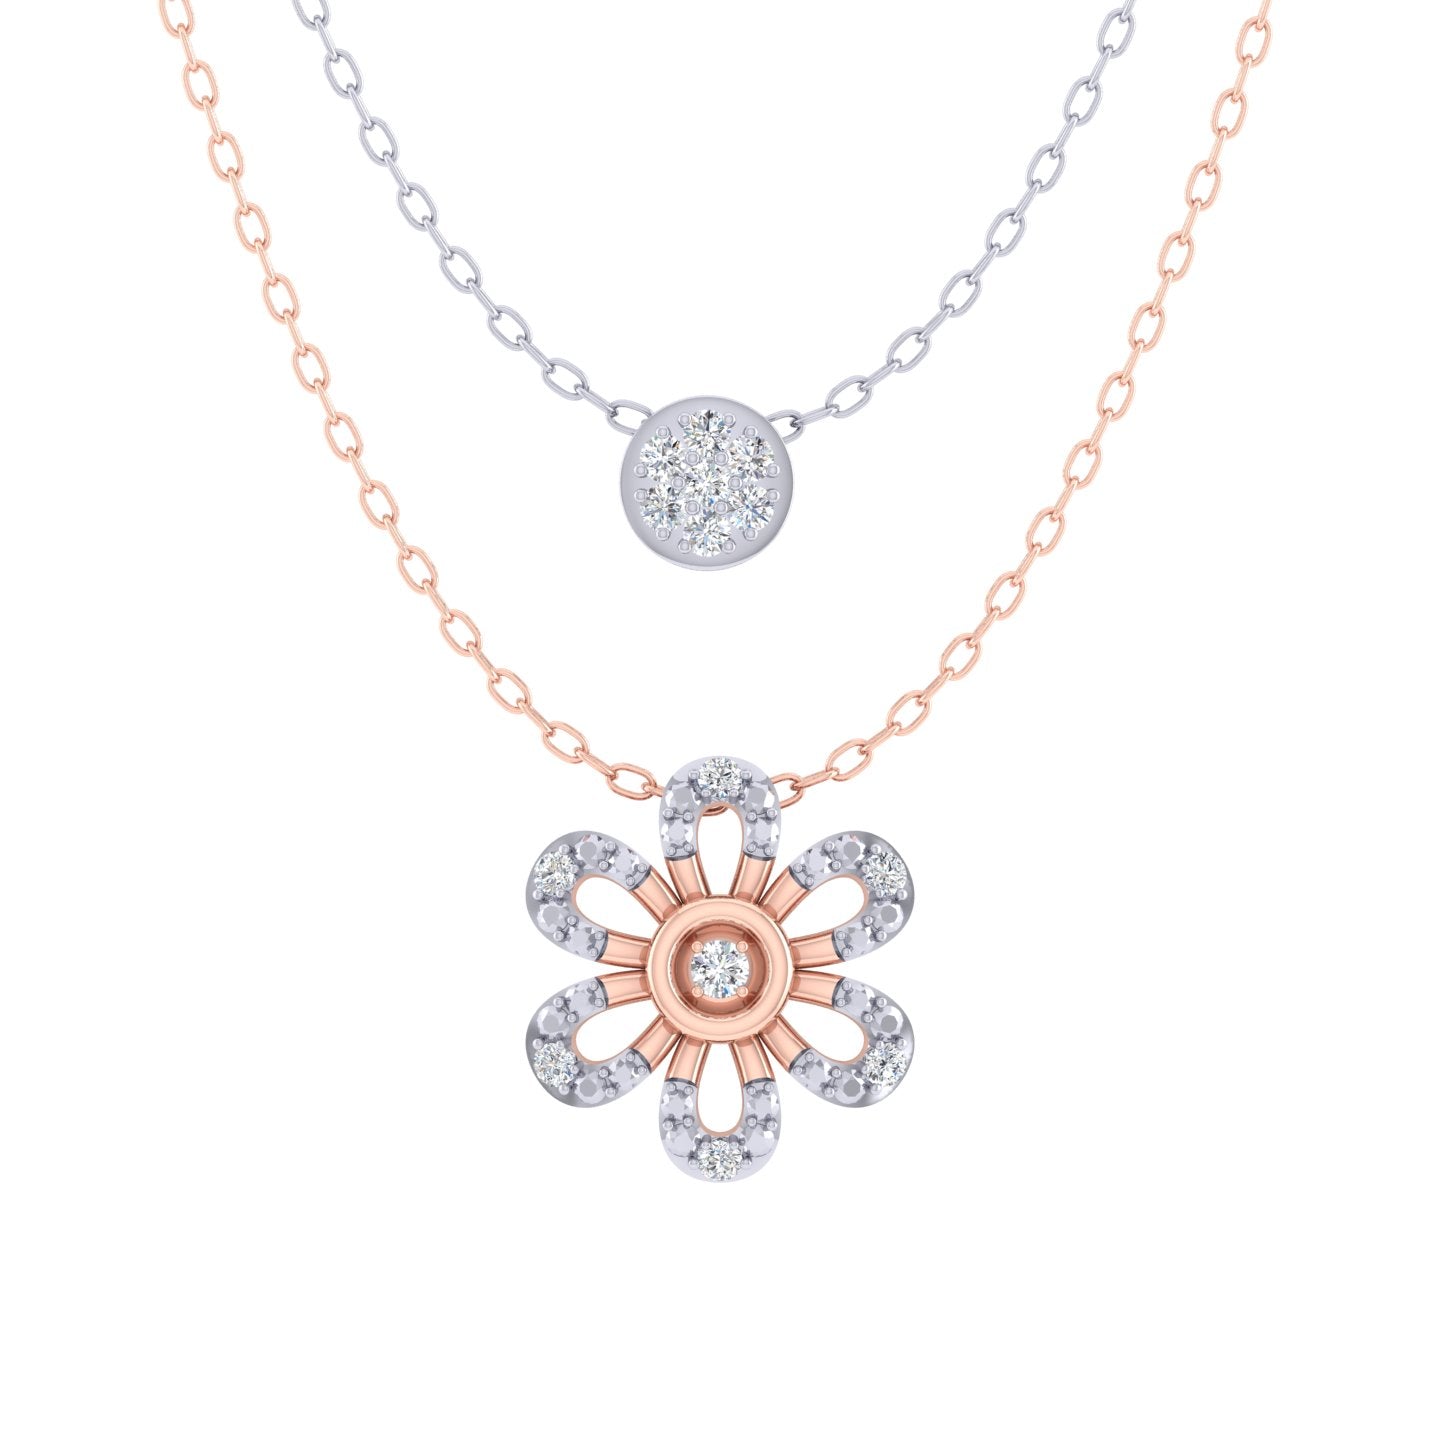 Cluster and Flower Layered 1/10 Cttw Natural Diamond Pendant Necklace set in 925 Sterling (Silver & Rose Gold)…